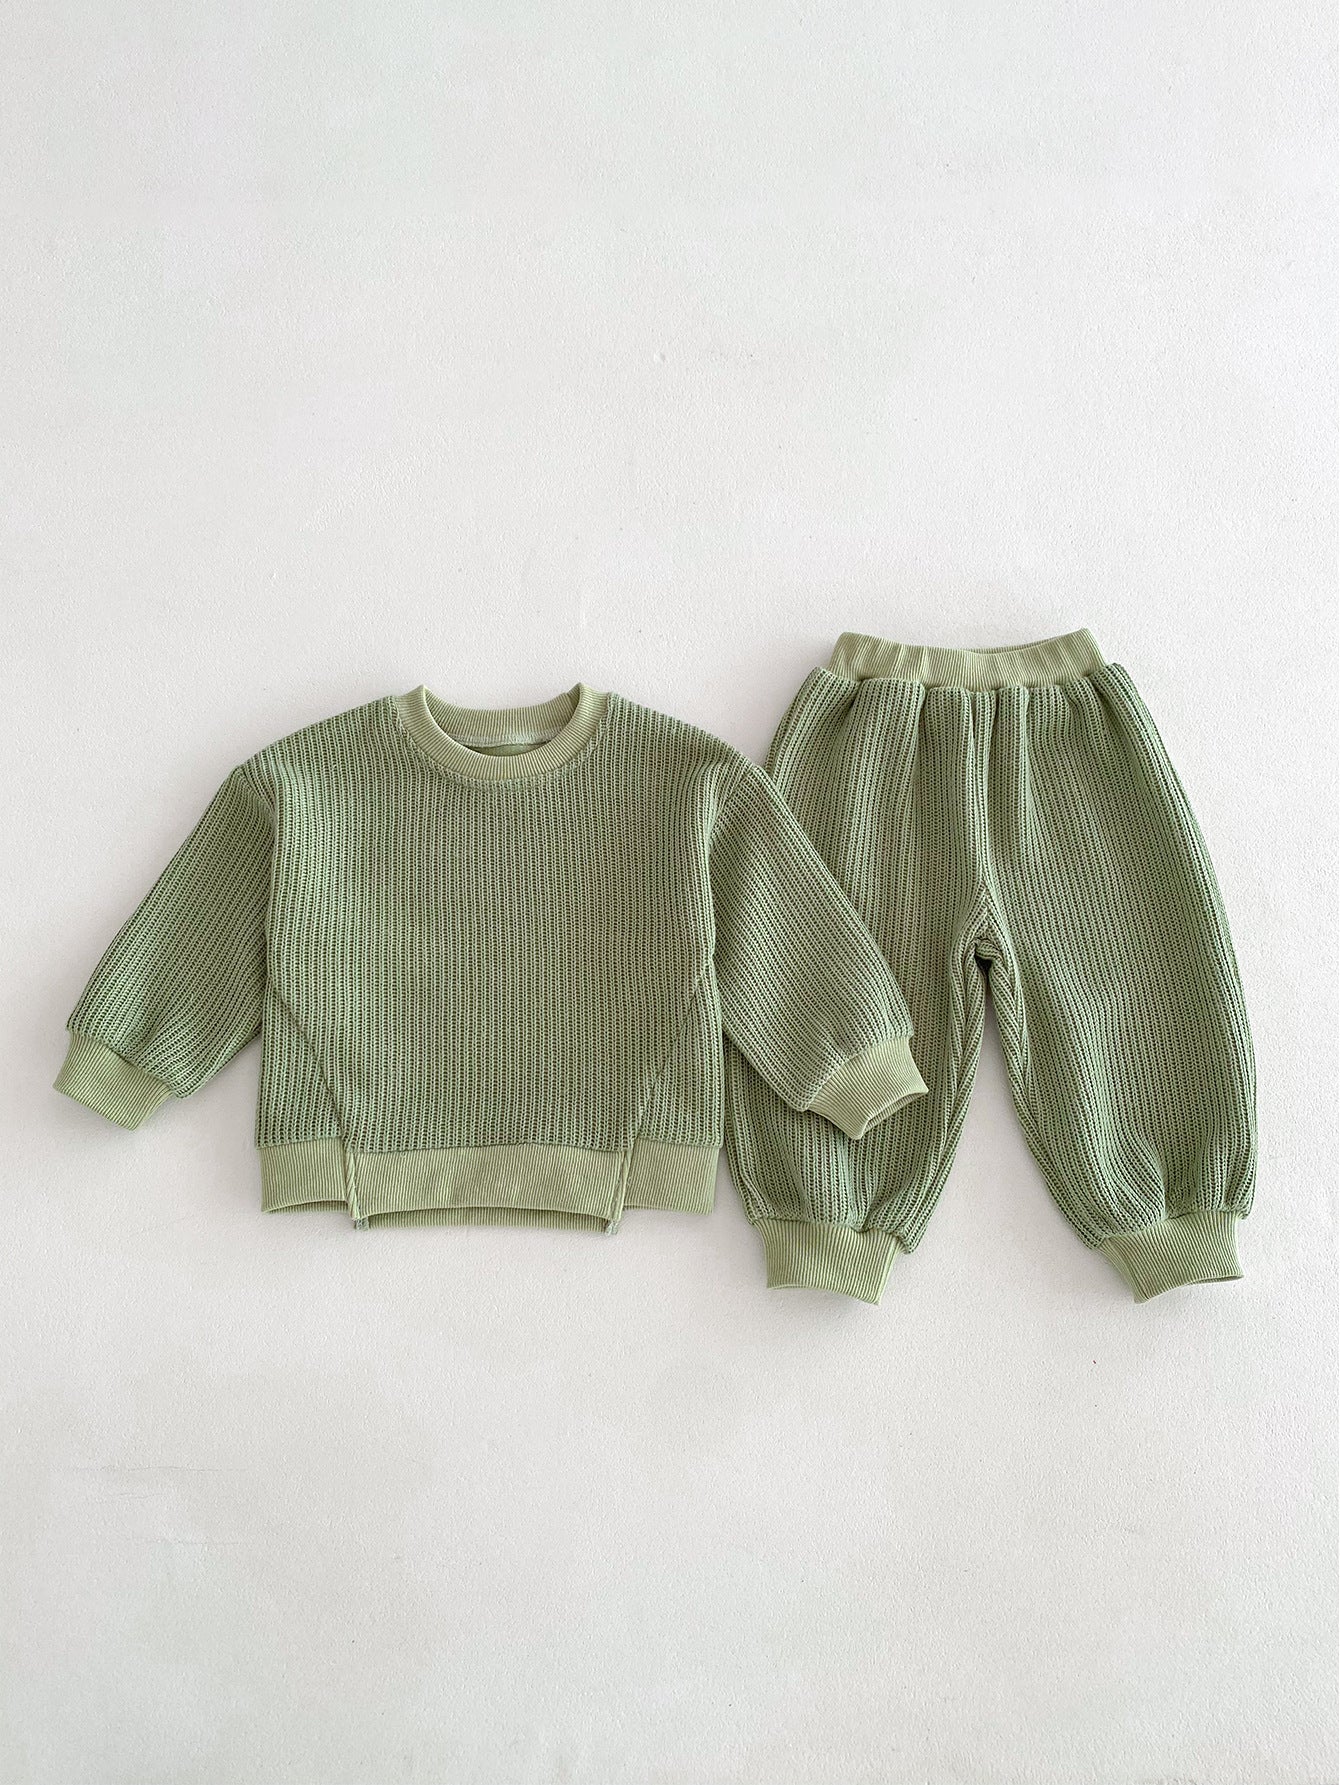 Children's Knitted Casual Sets